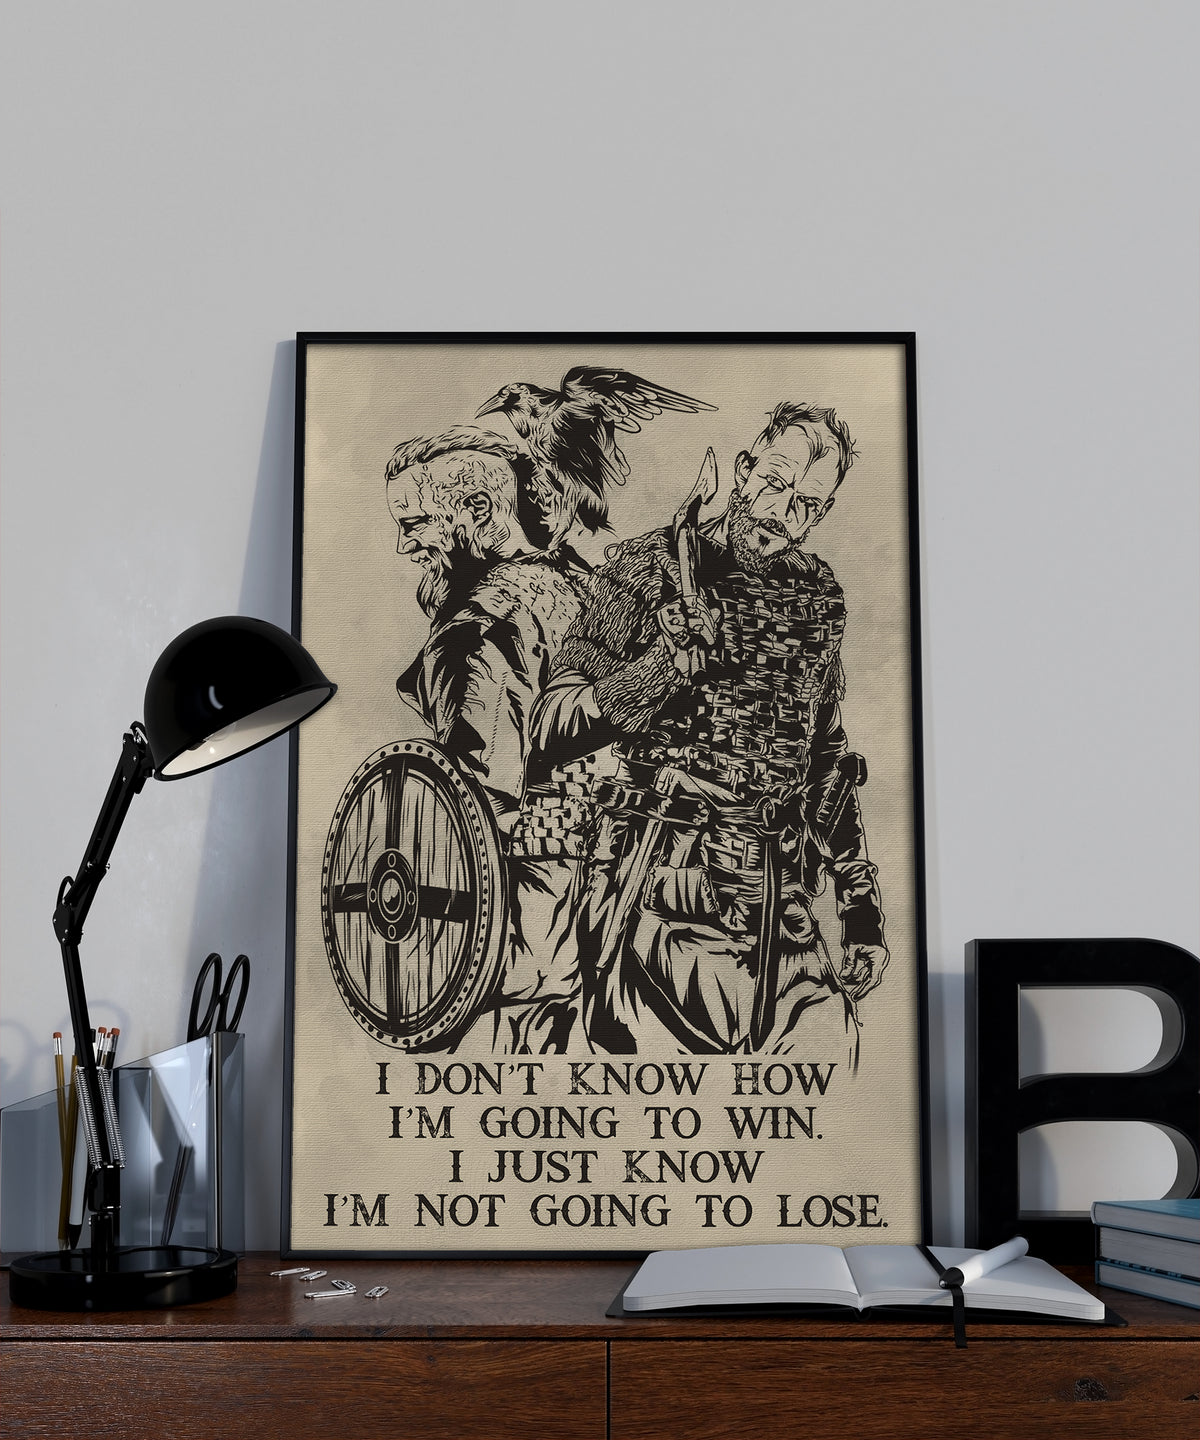 VK053 - I'm Not Going To Lose - Viking Poster